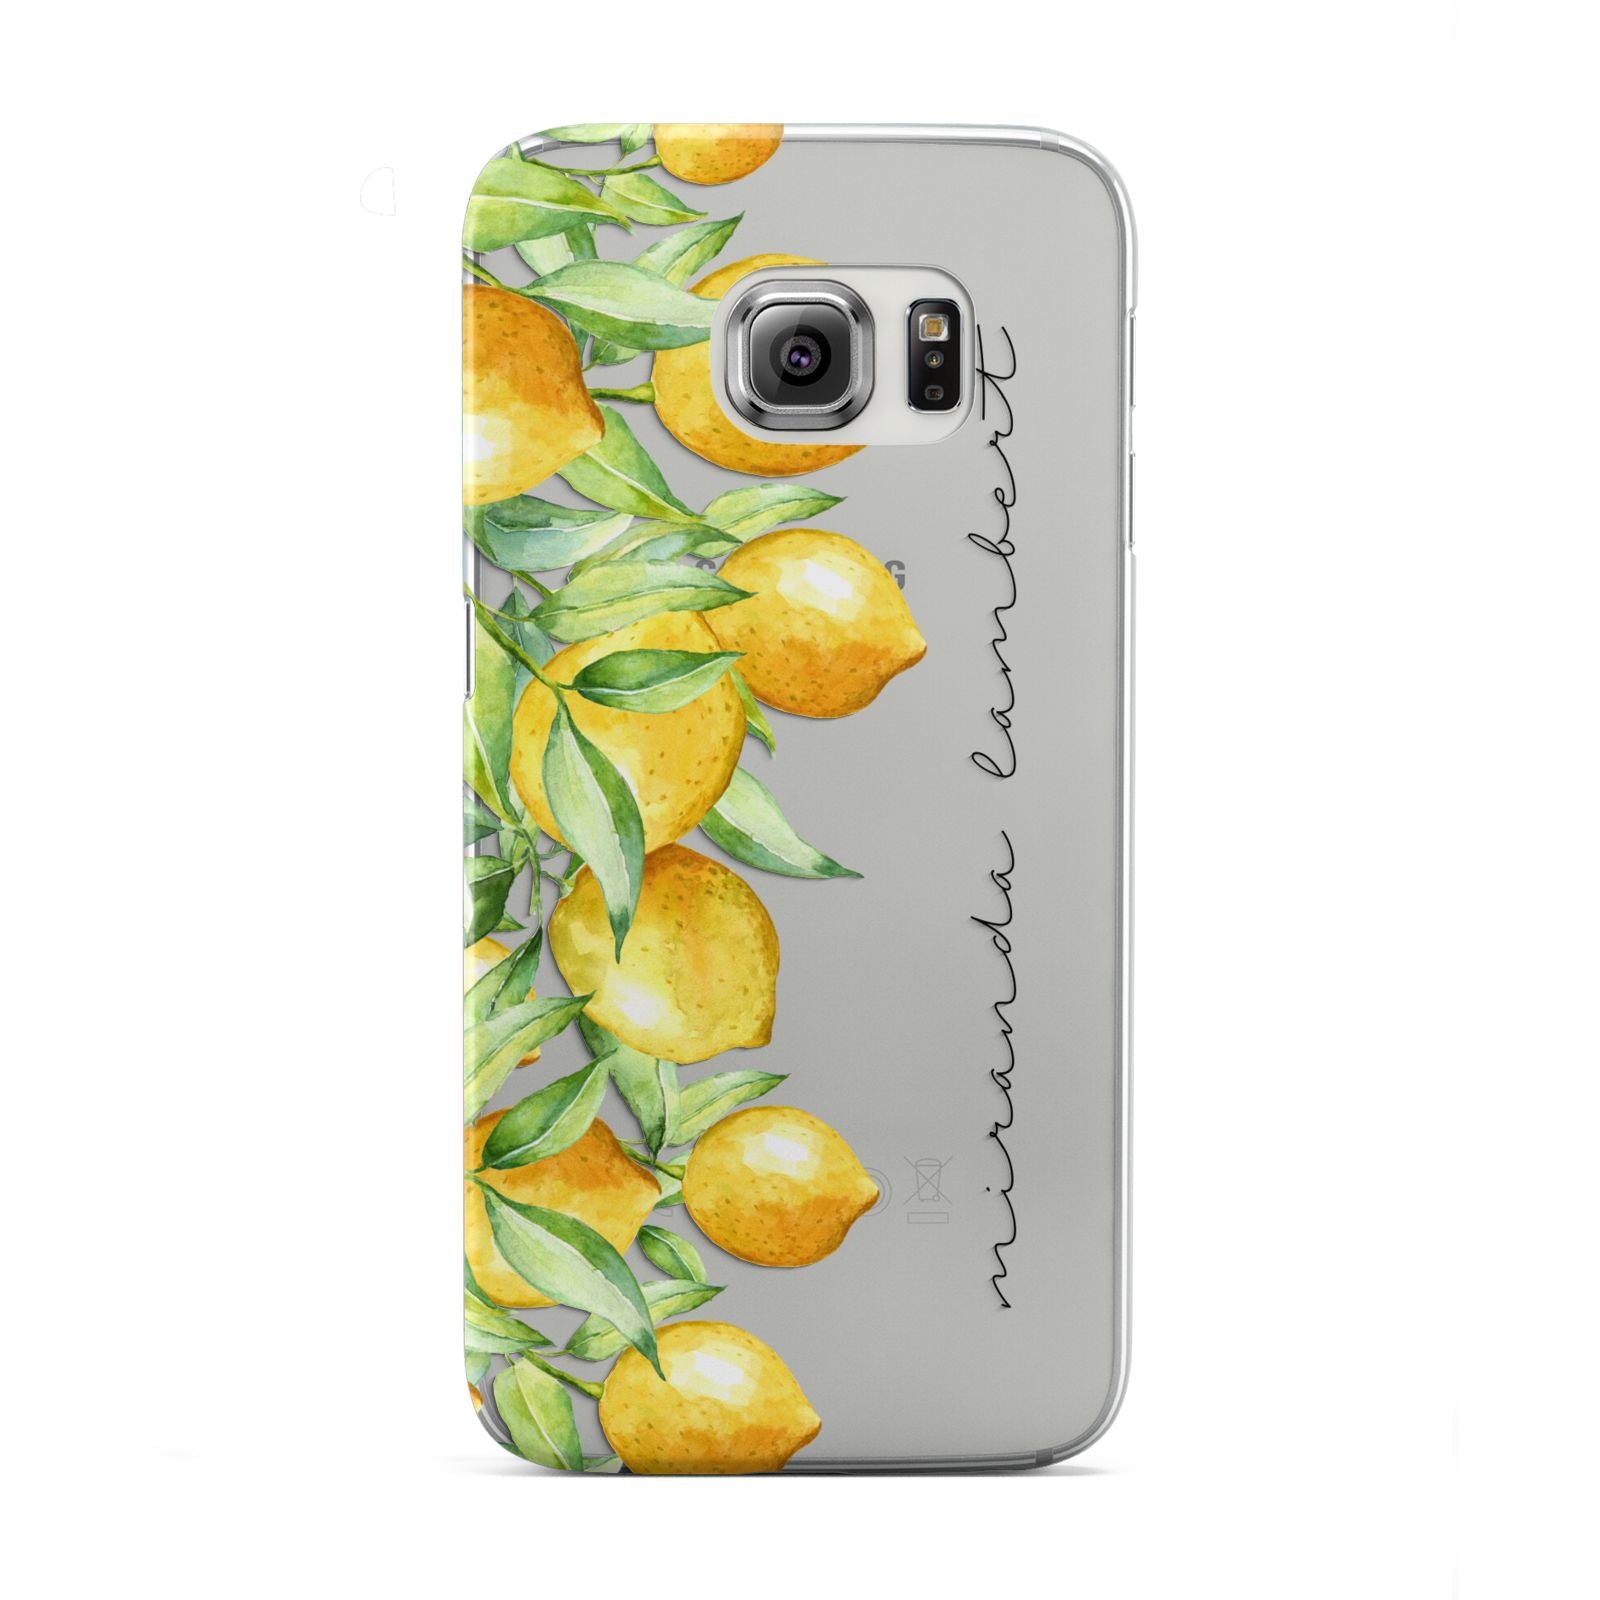 Personalised Lemon Bunches Samsung Galaxy S6 Edge Case